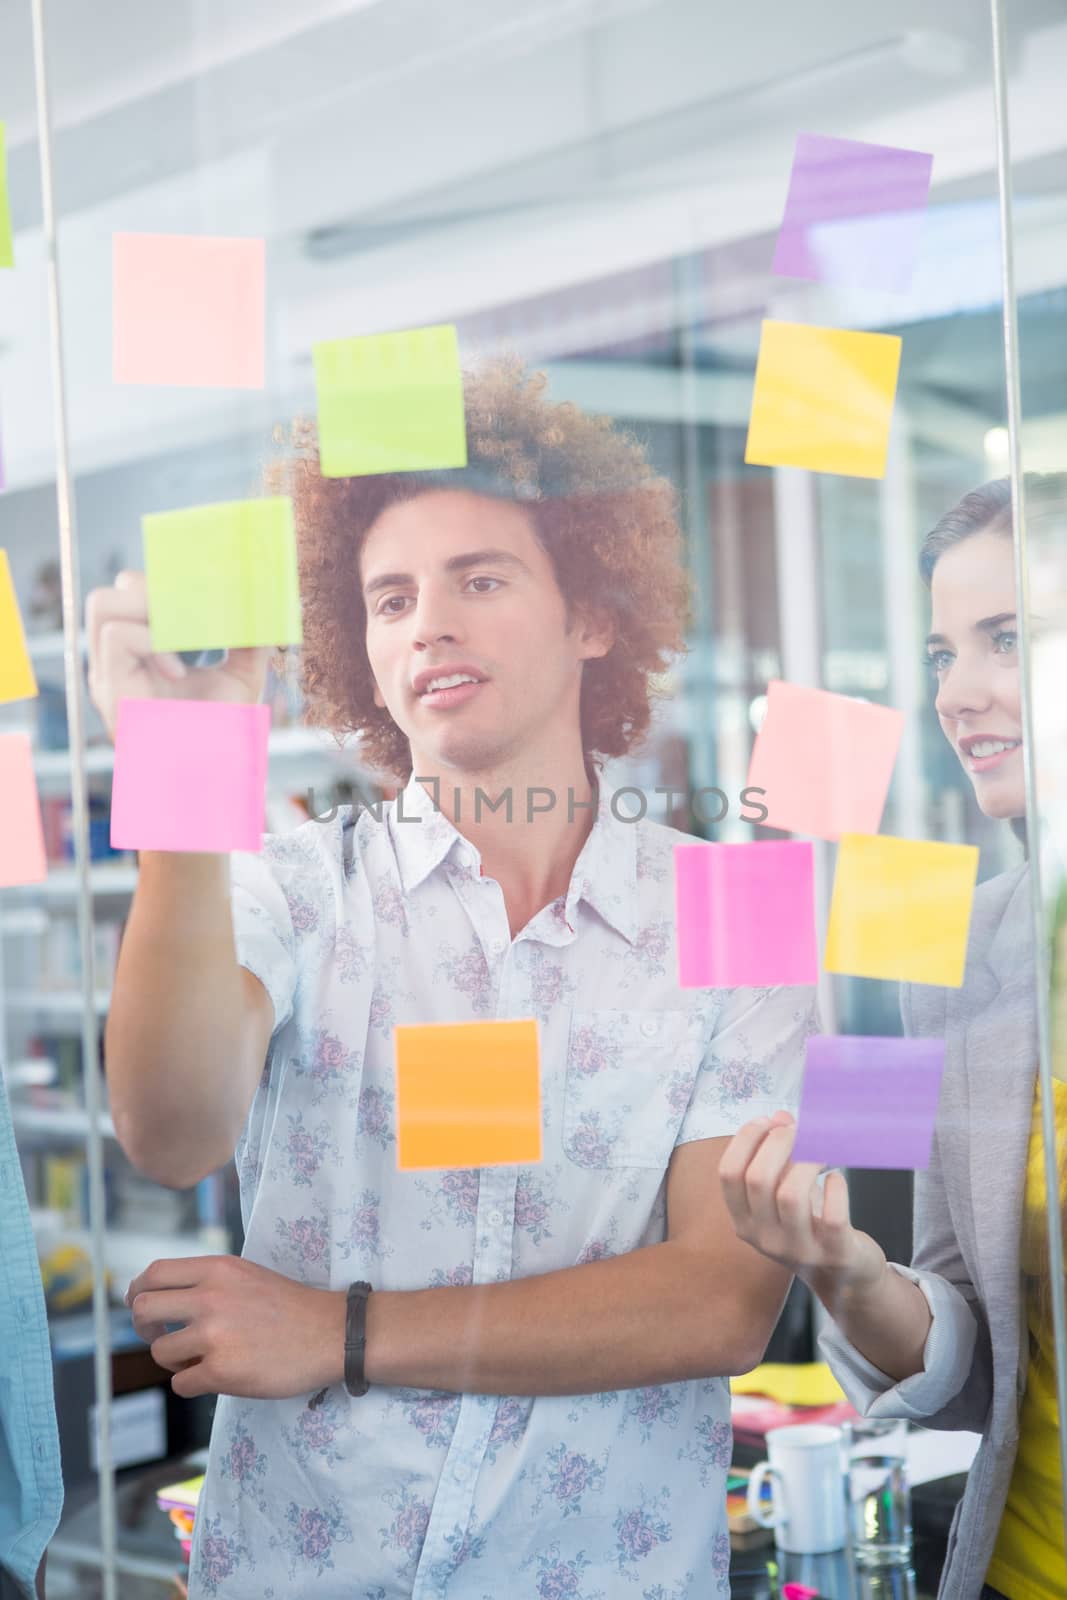 Creative business team writing on adhesive notes in office